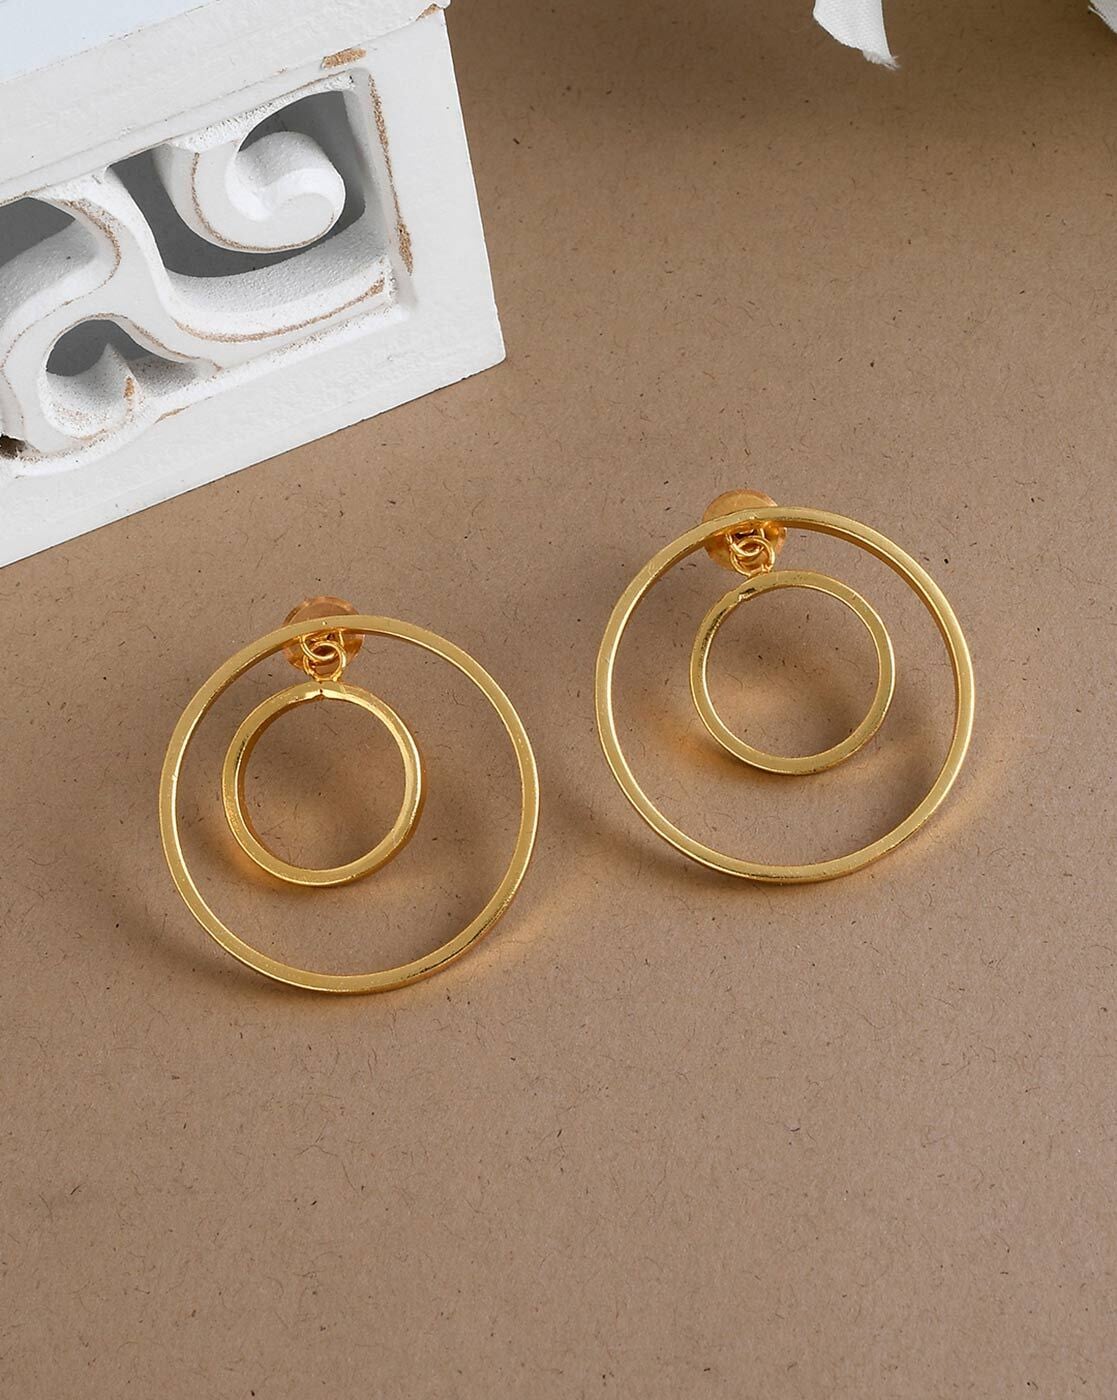 Fashionable Gold Plated Twist Design Bali Hoop Earring For Women or Girls  at Rs 15/pair | Gopalpura Bypass | Jaipur | ID: 23194316930